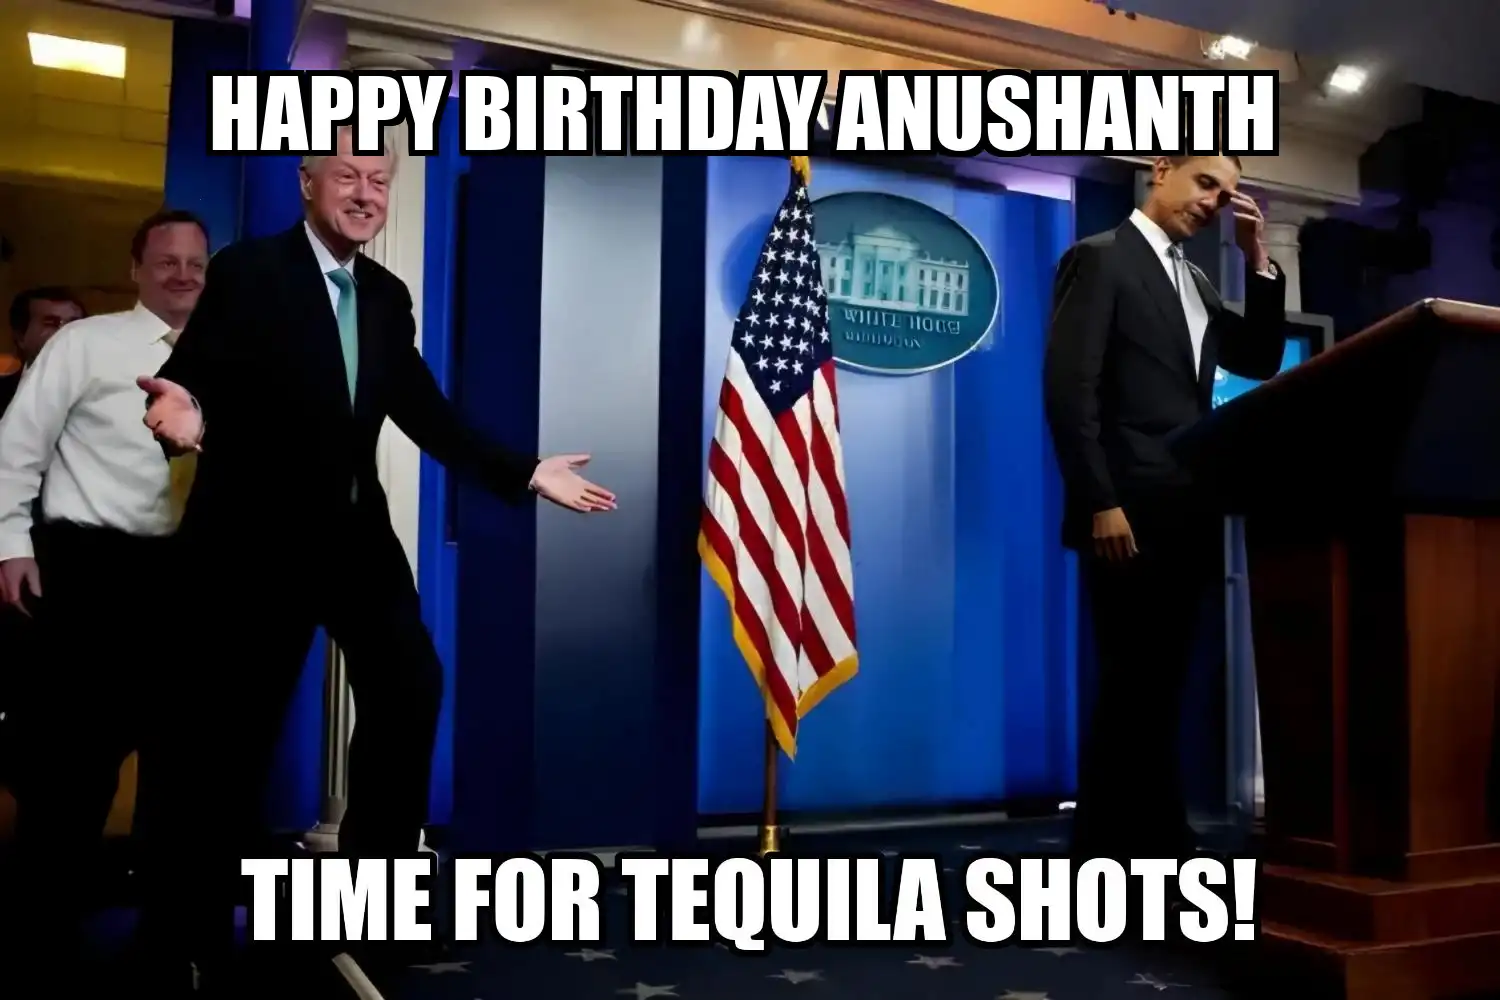 Happy Birthday Anushanth Time For Tequila Shots Memes